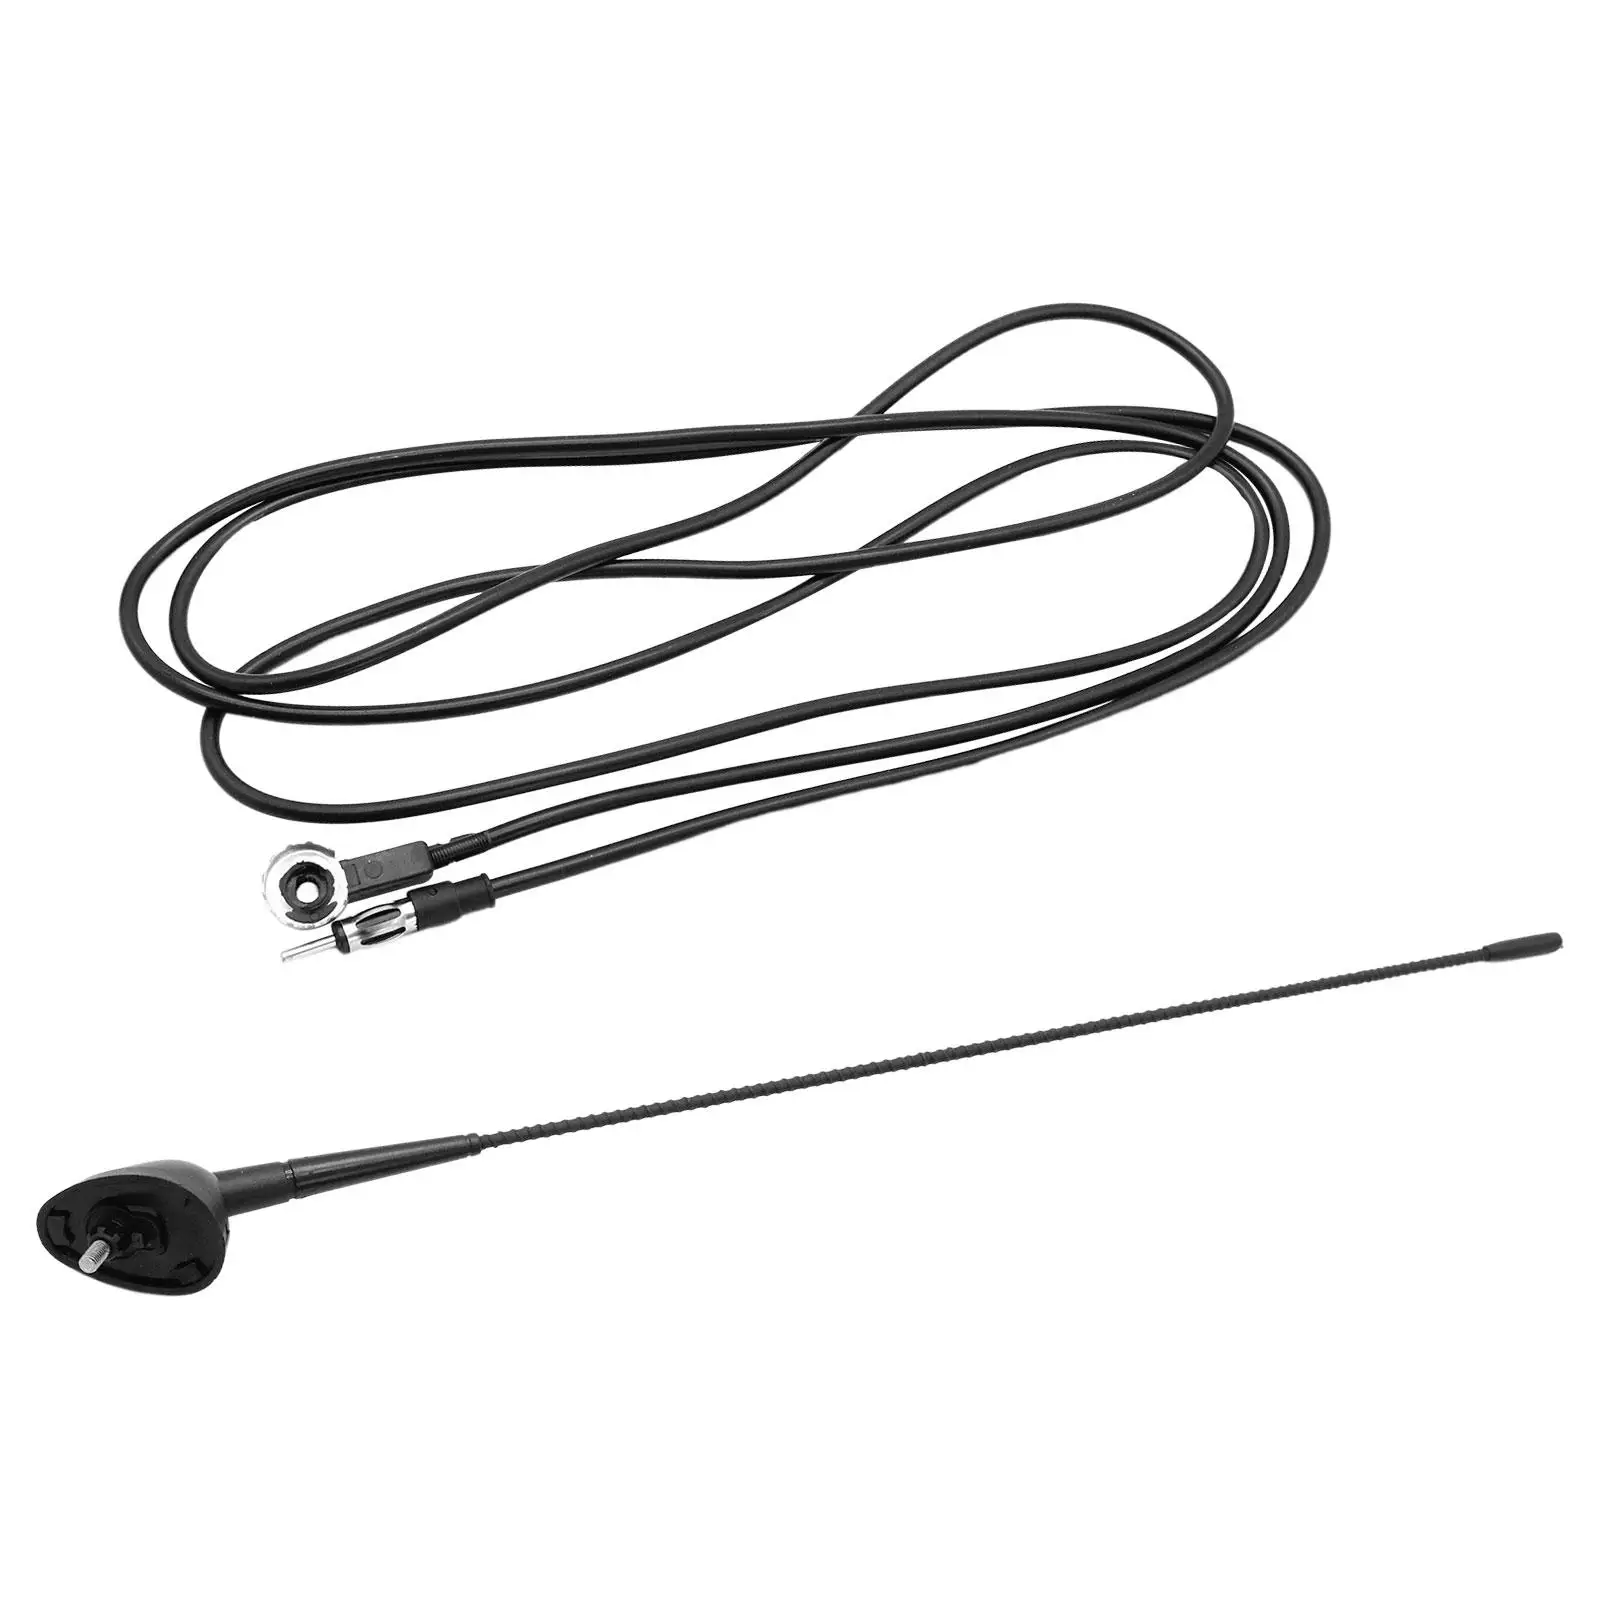 Front Roof Antenna Mast Cable 2858939969 for Fiat PUNTO Multipla Brava